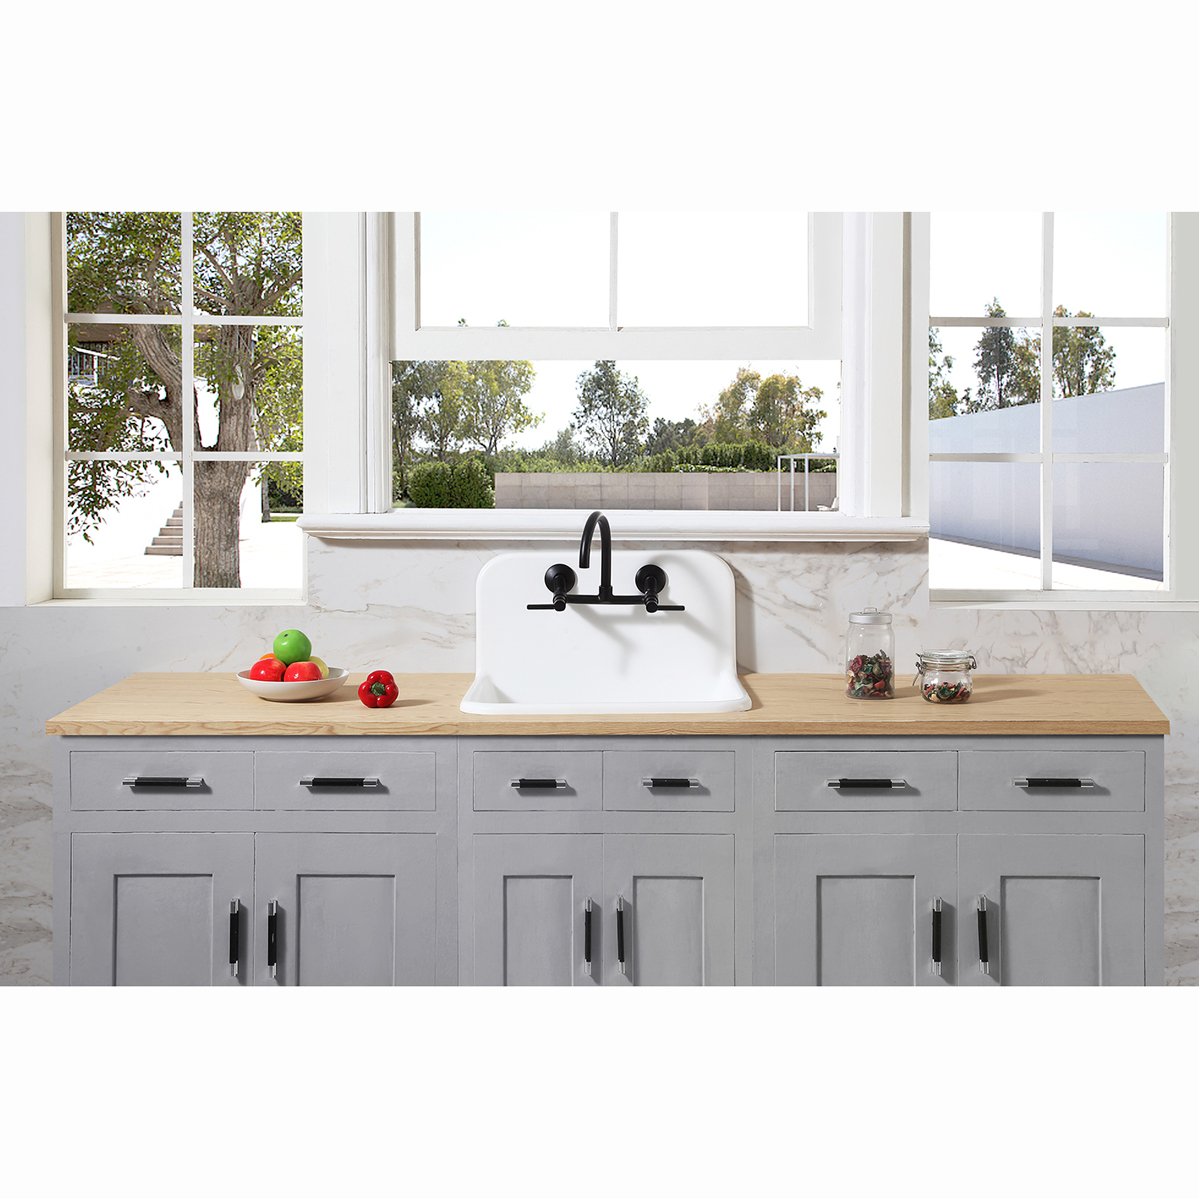 Kingston Brass Concord Wall Mount 2-Hole 8-Inch Adjustable Center Kitchen Faucet